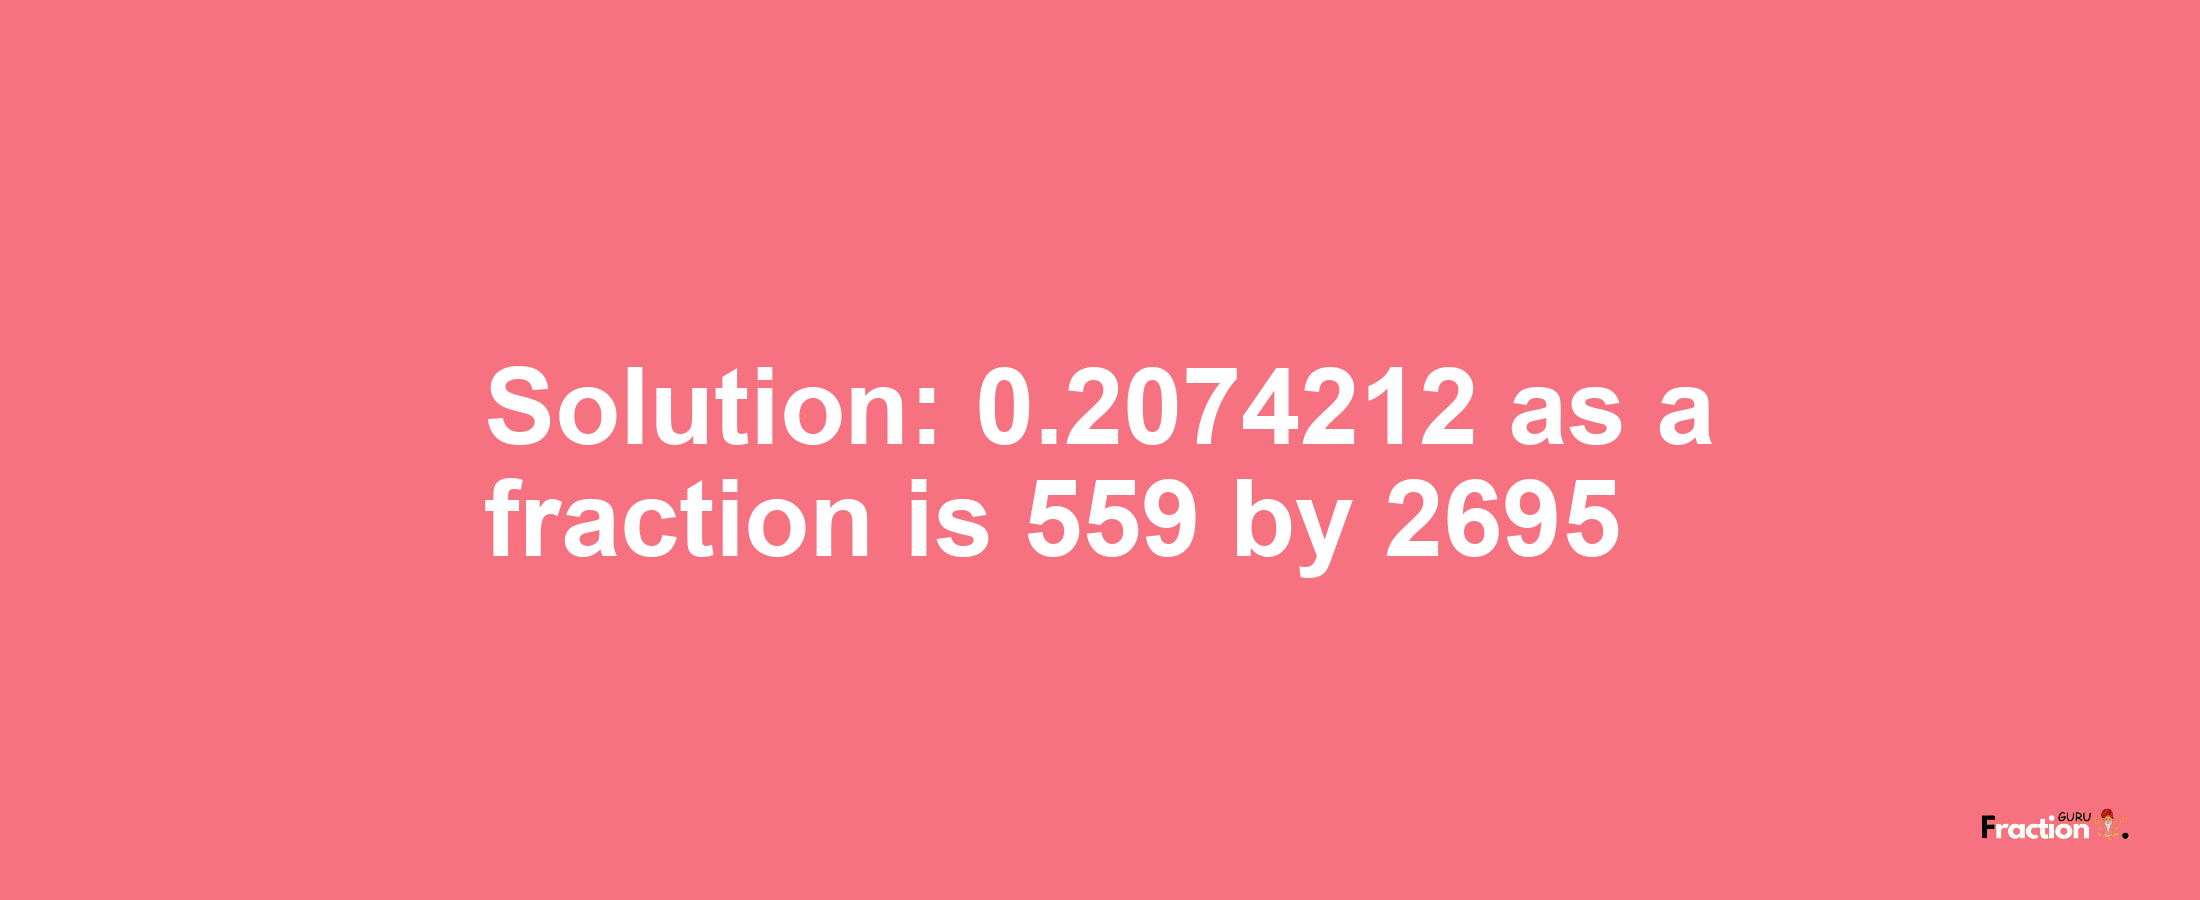 Solution:0.2074212 as a fraction is 559/2695